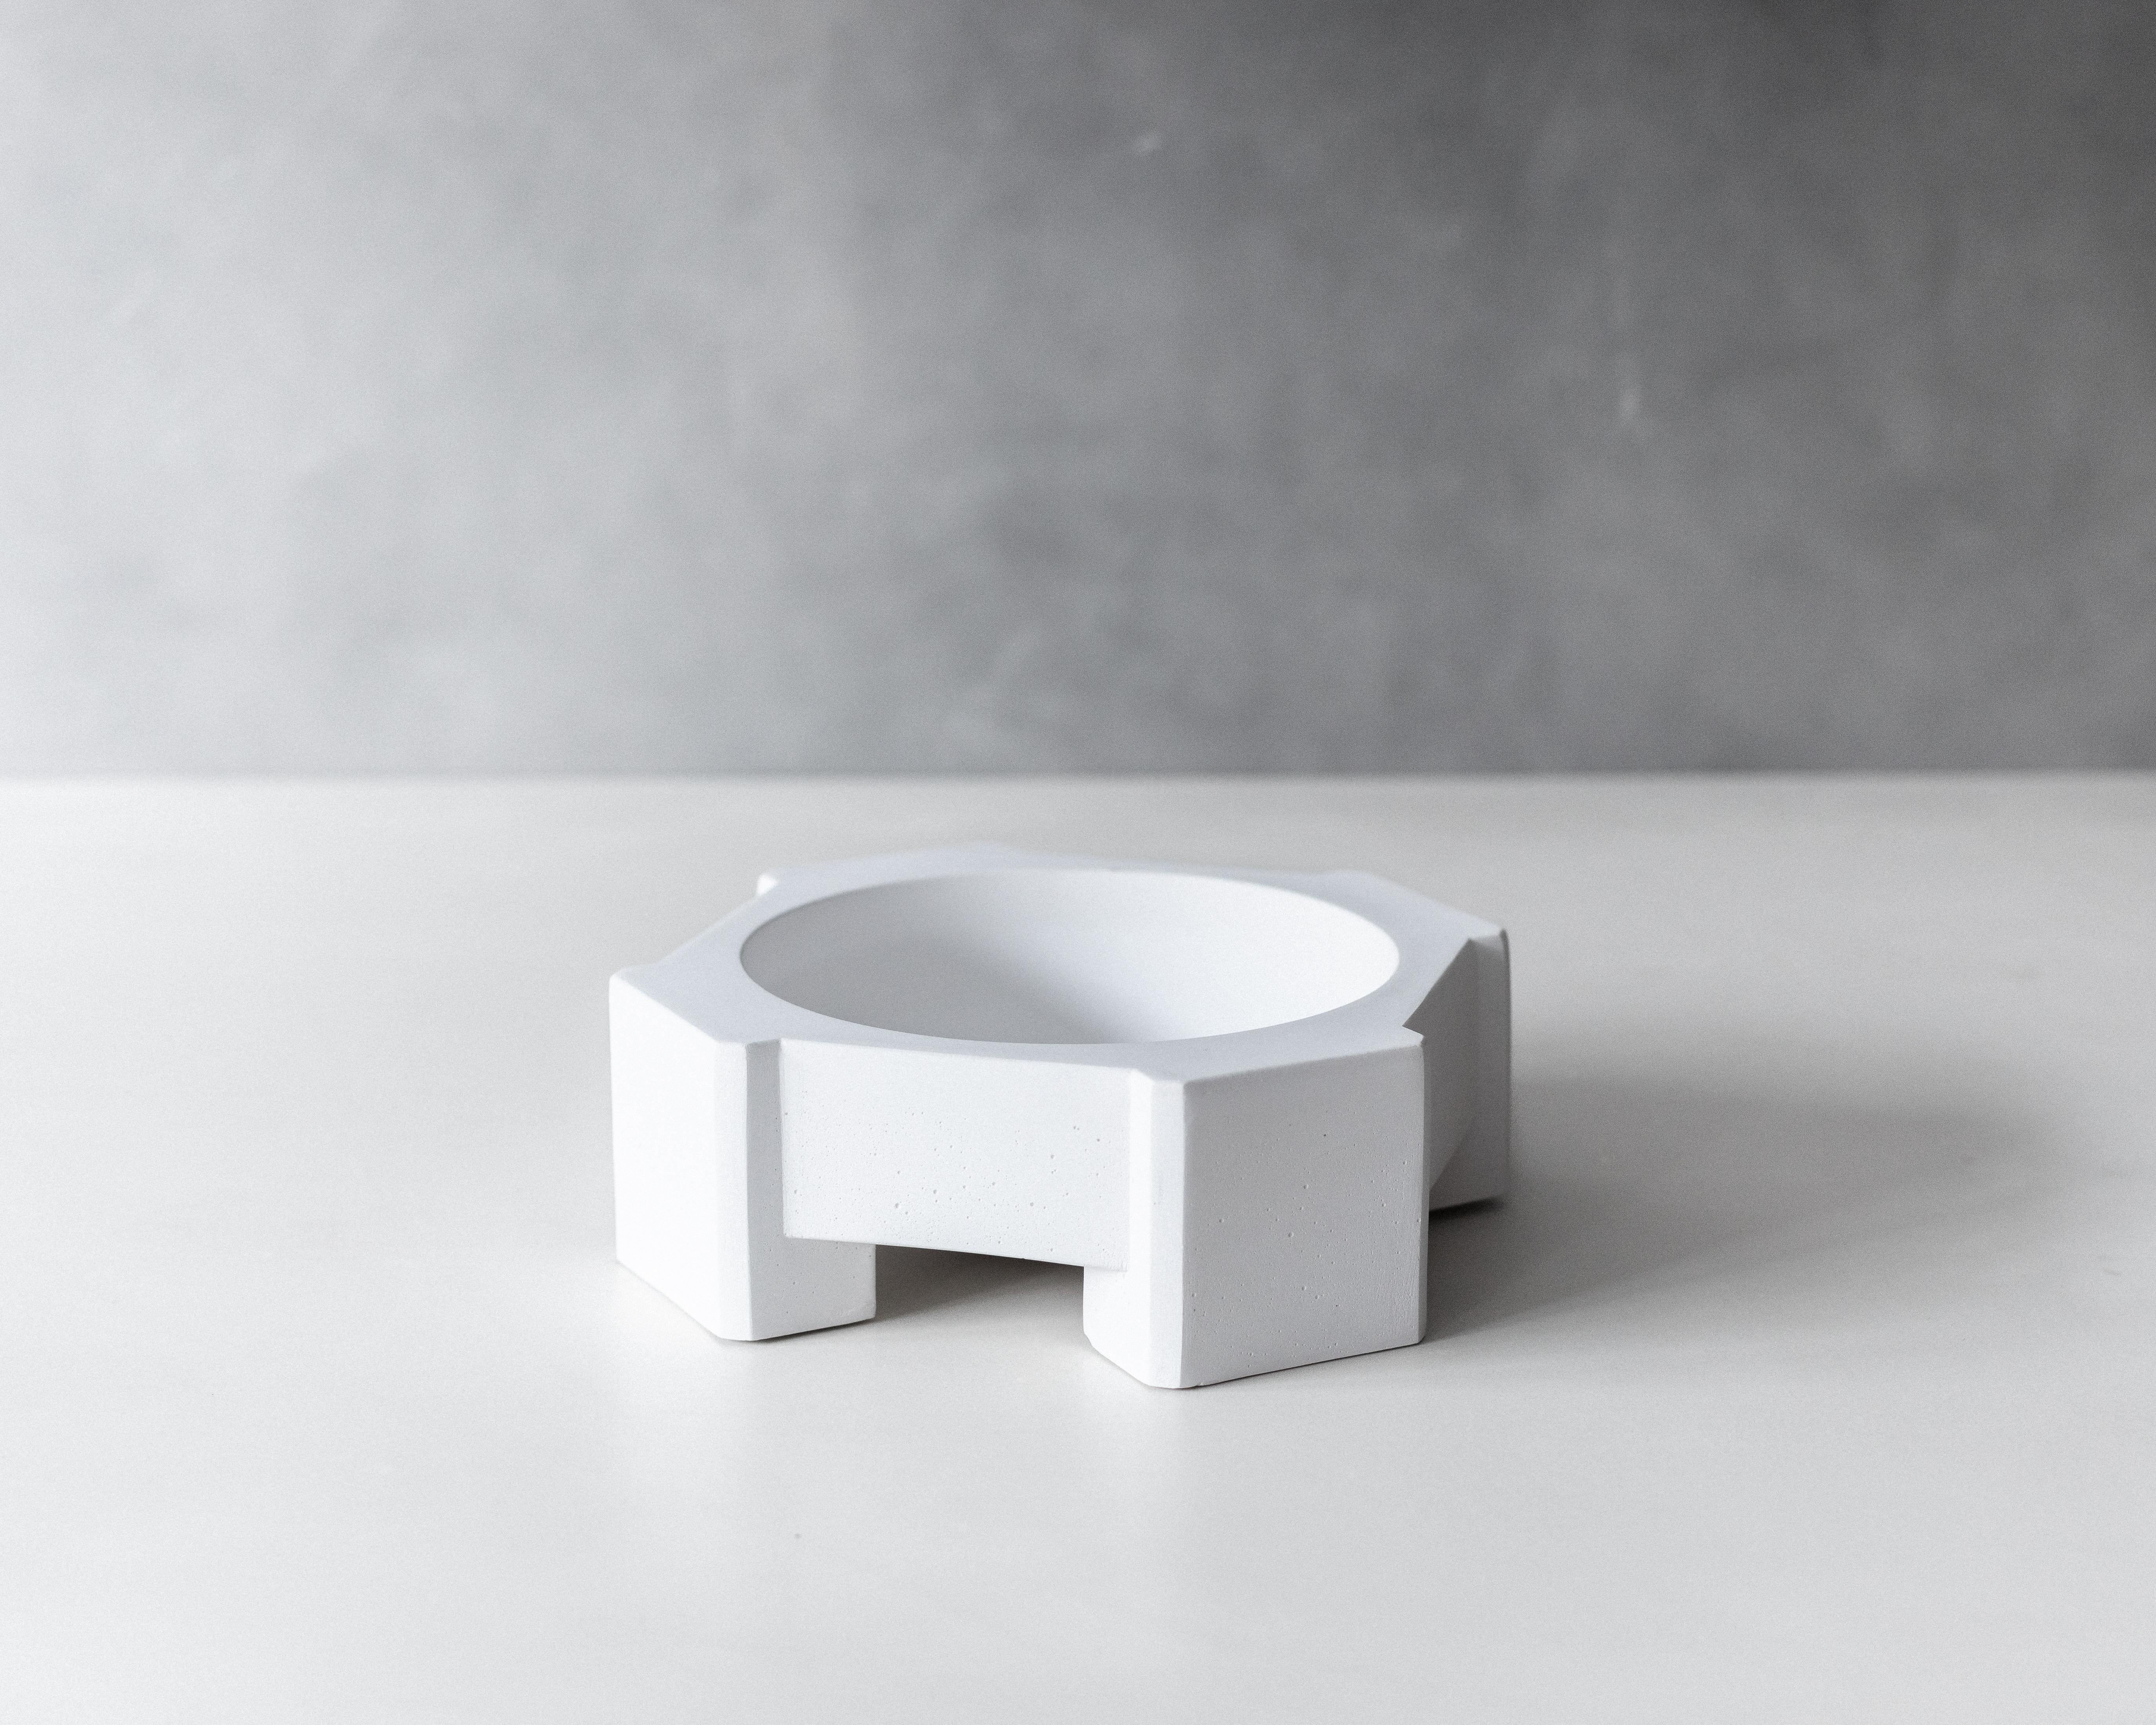 Our hand-cast gypsum cement Brutalist Catchall made in our Brooklyn studio, was inspired by the architecture of London’s Royal National Theatre. When stacked, these sculptural pieces evoke the massing of a concrete building.

All packaging is